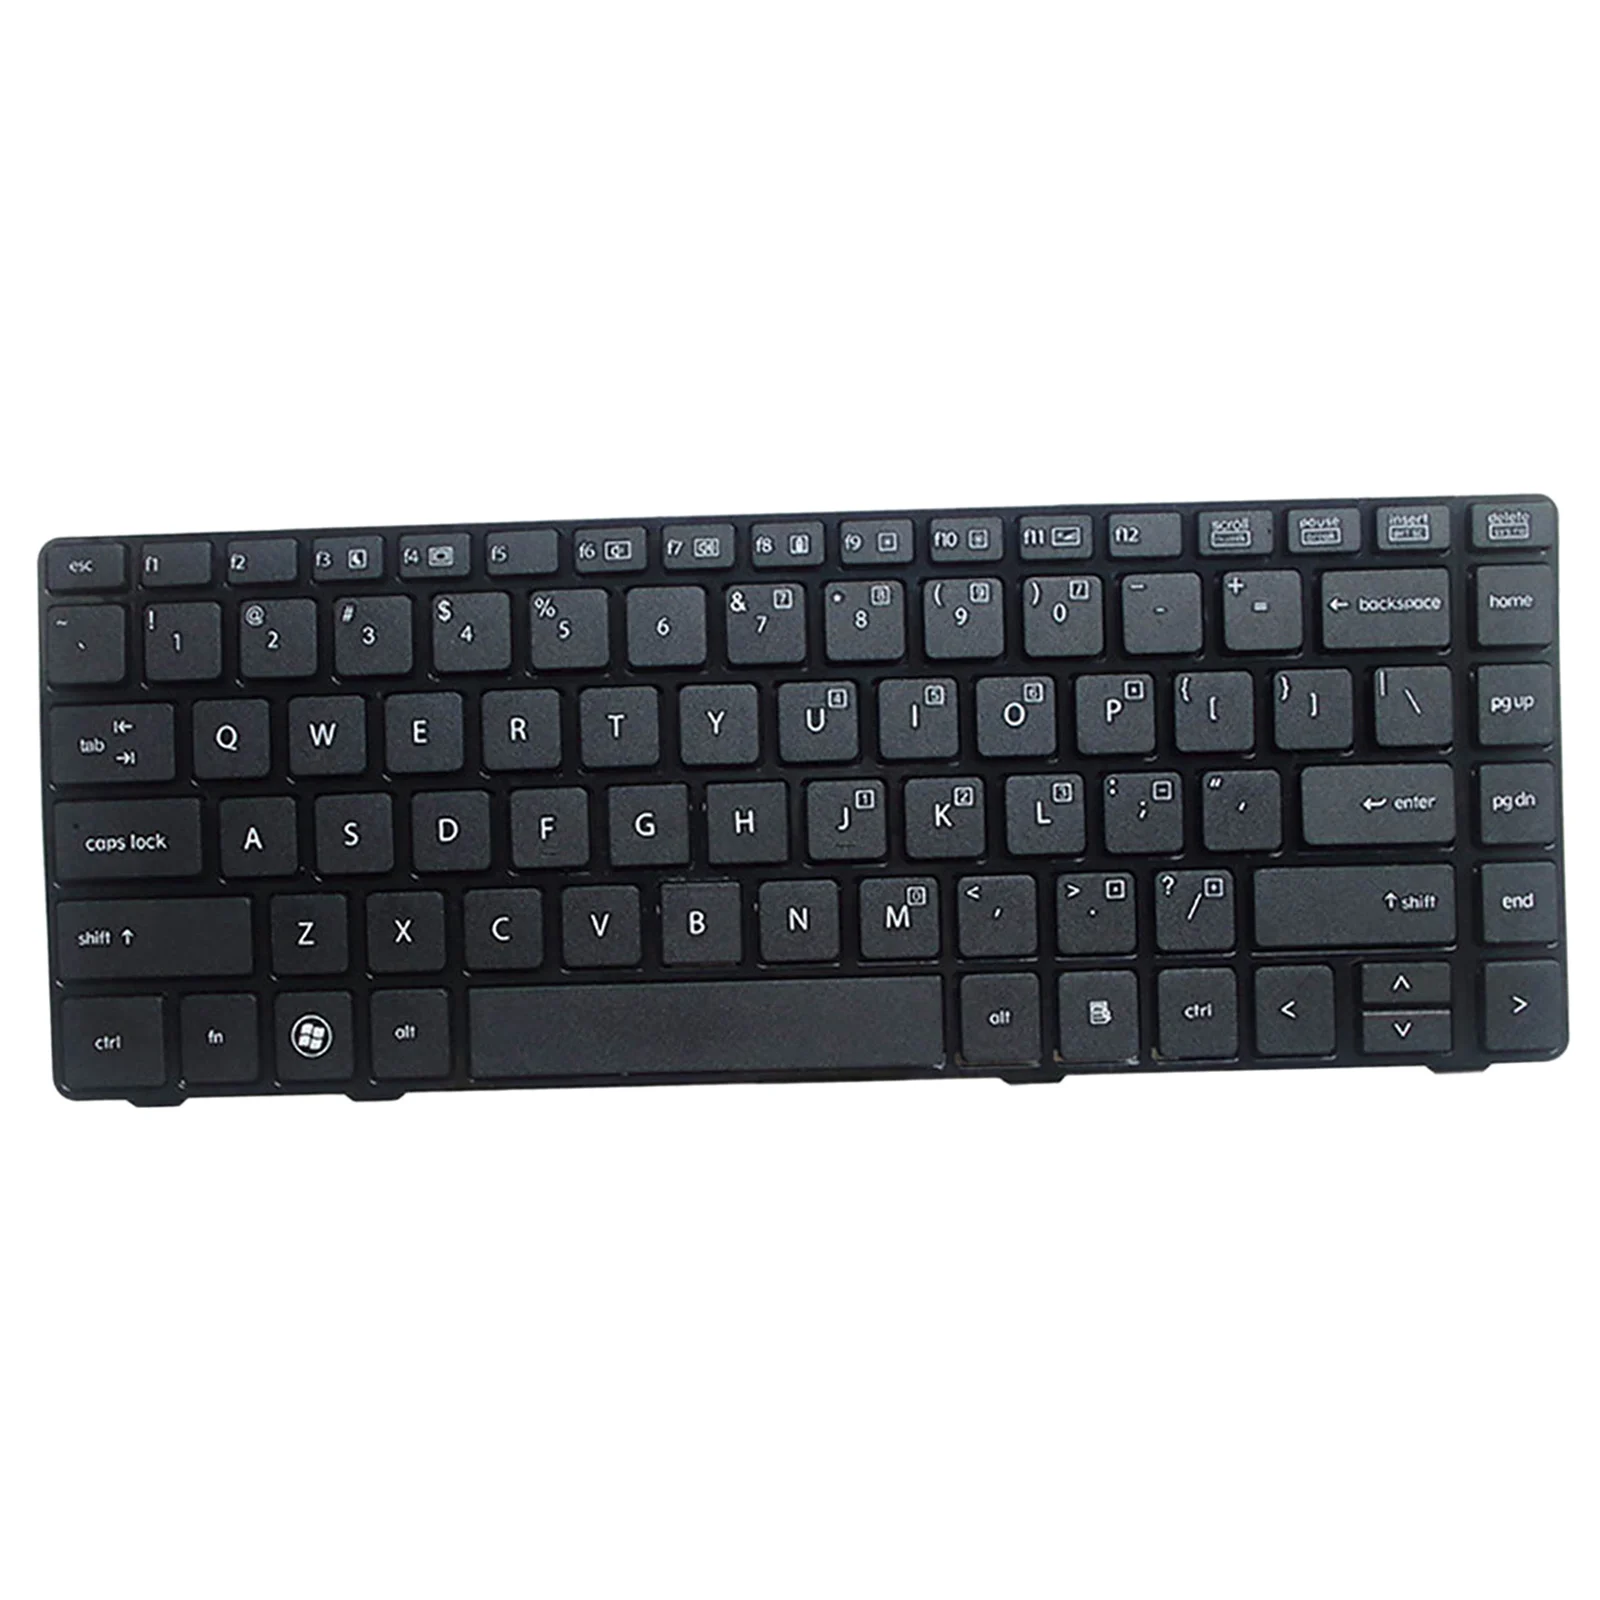 US Layout Keyboard Replace for HP EliteBook 8460p 8470p ProBook 6460b 6465b